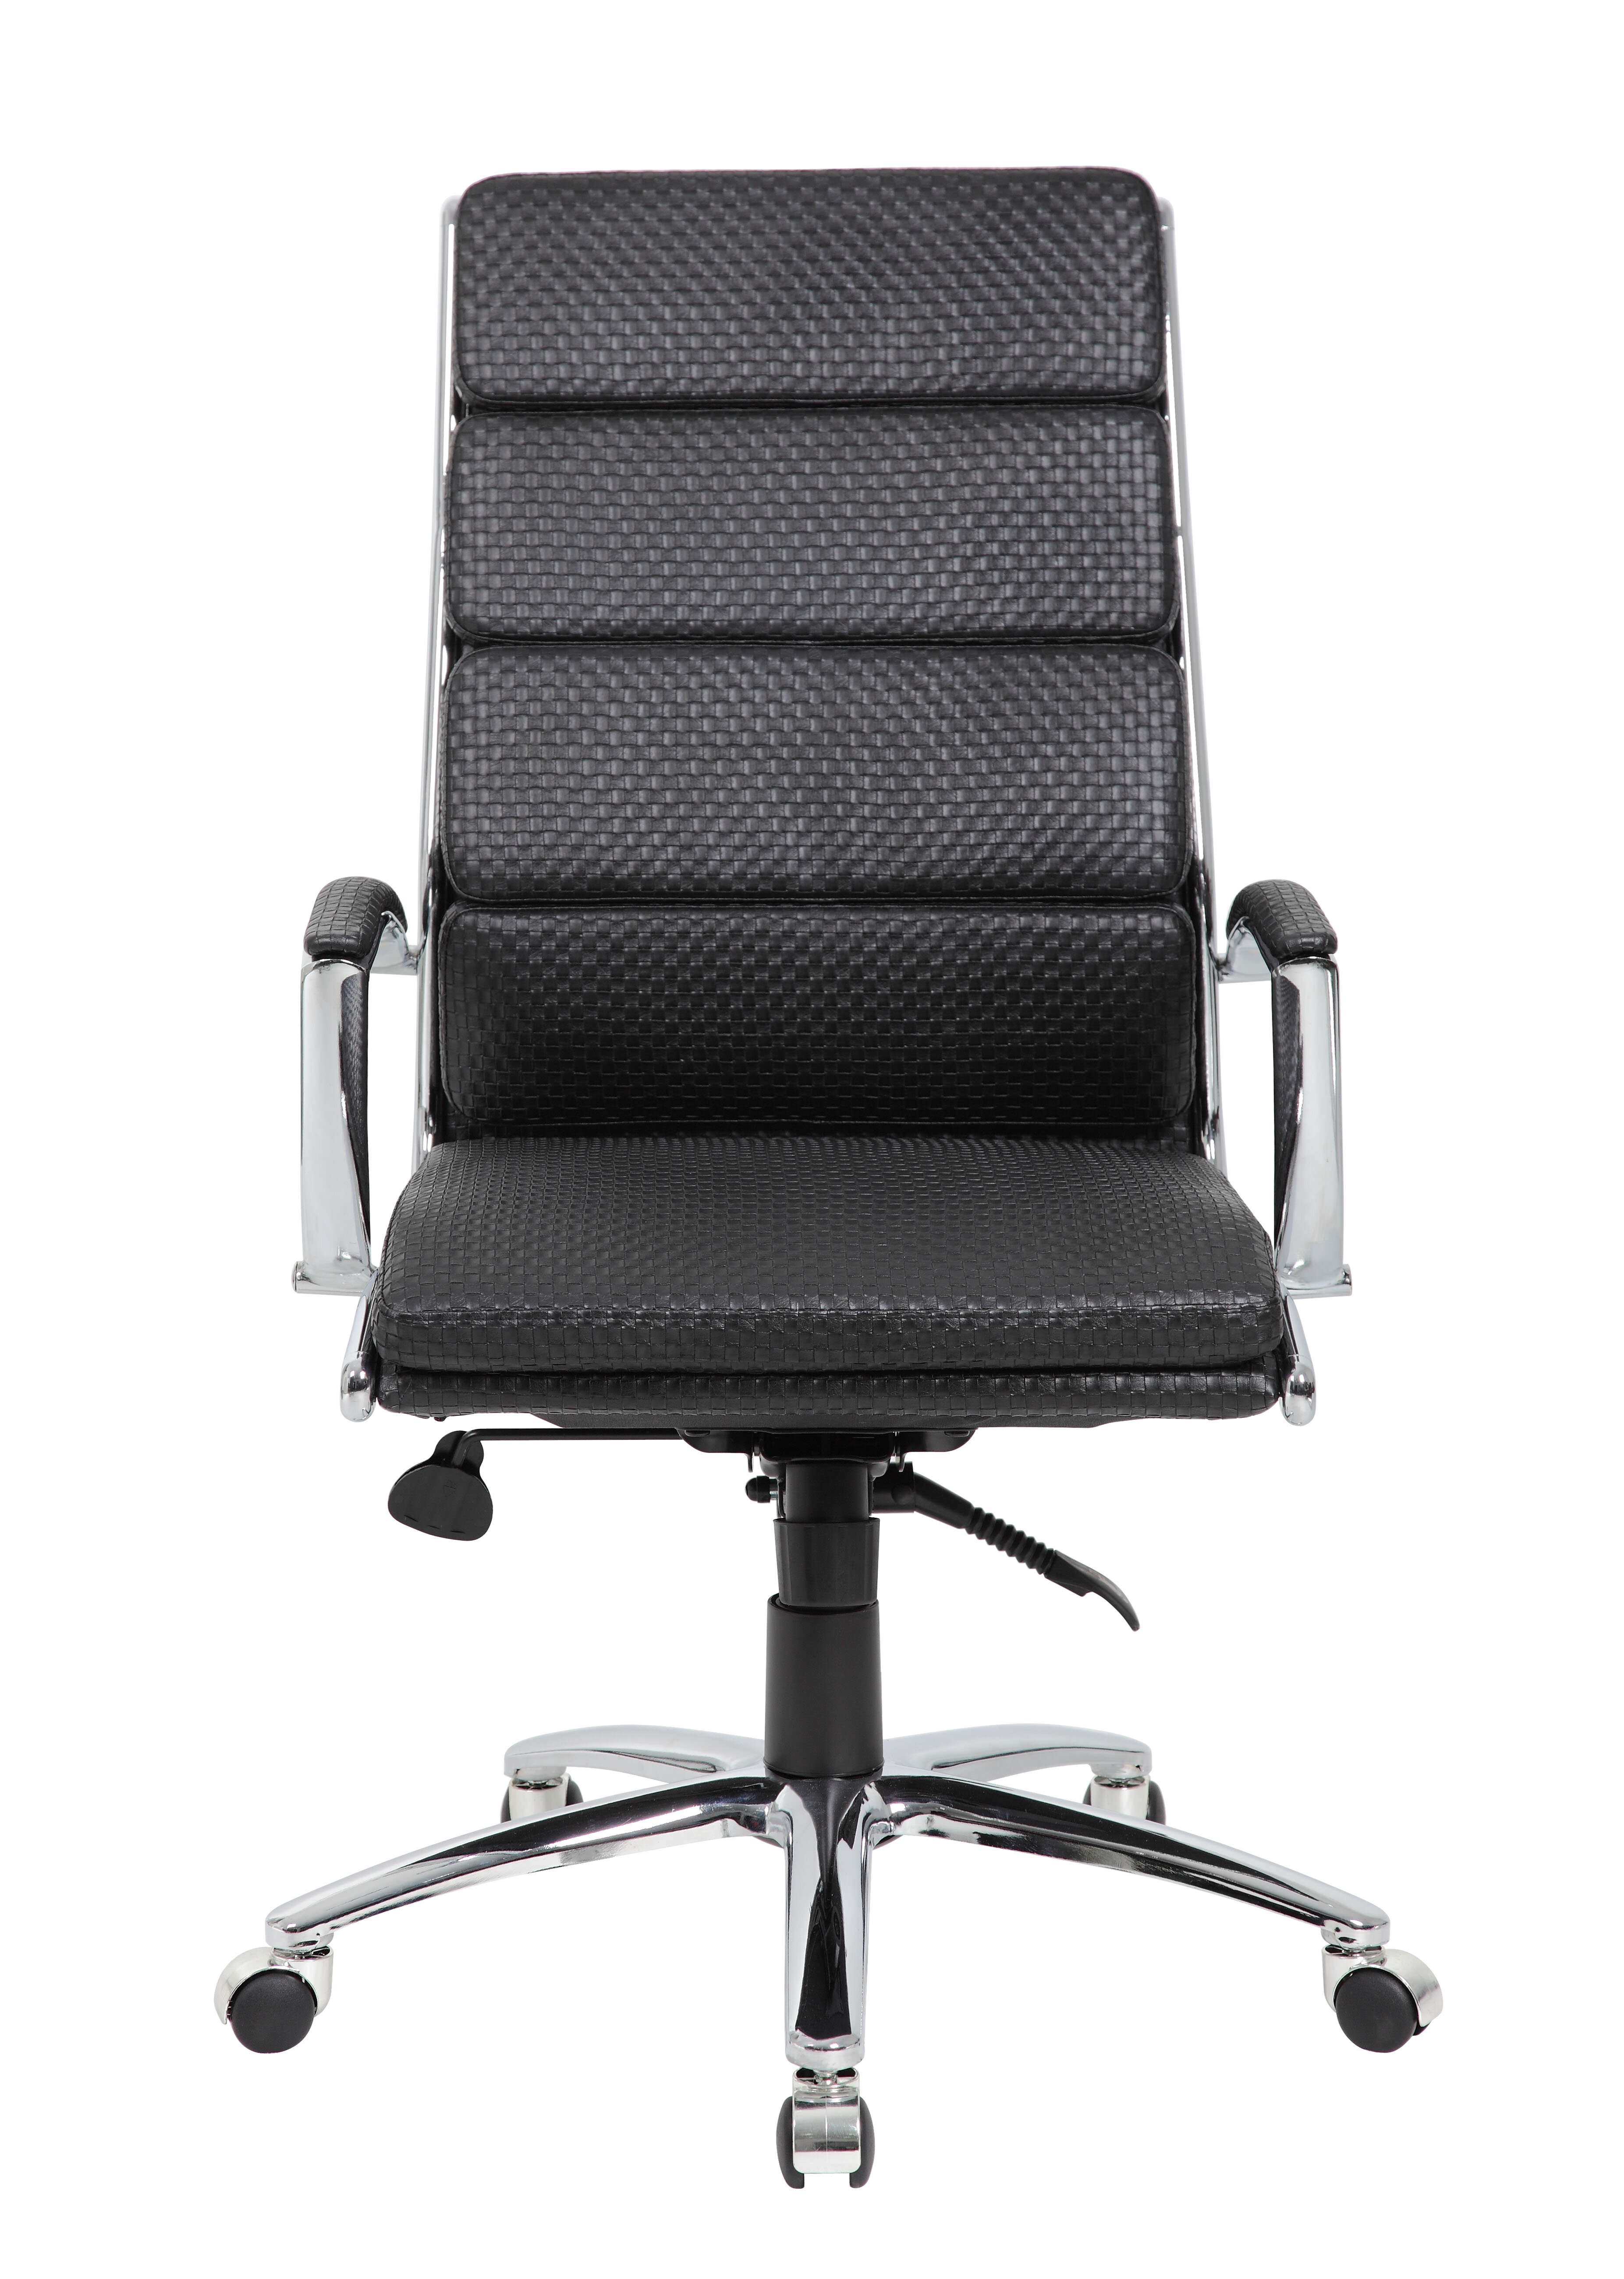 Padded Arms Office Chairs You'll Love | Wayfair